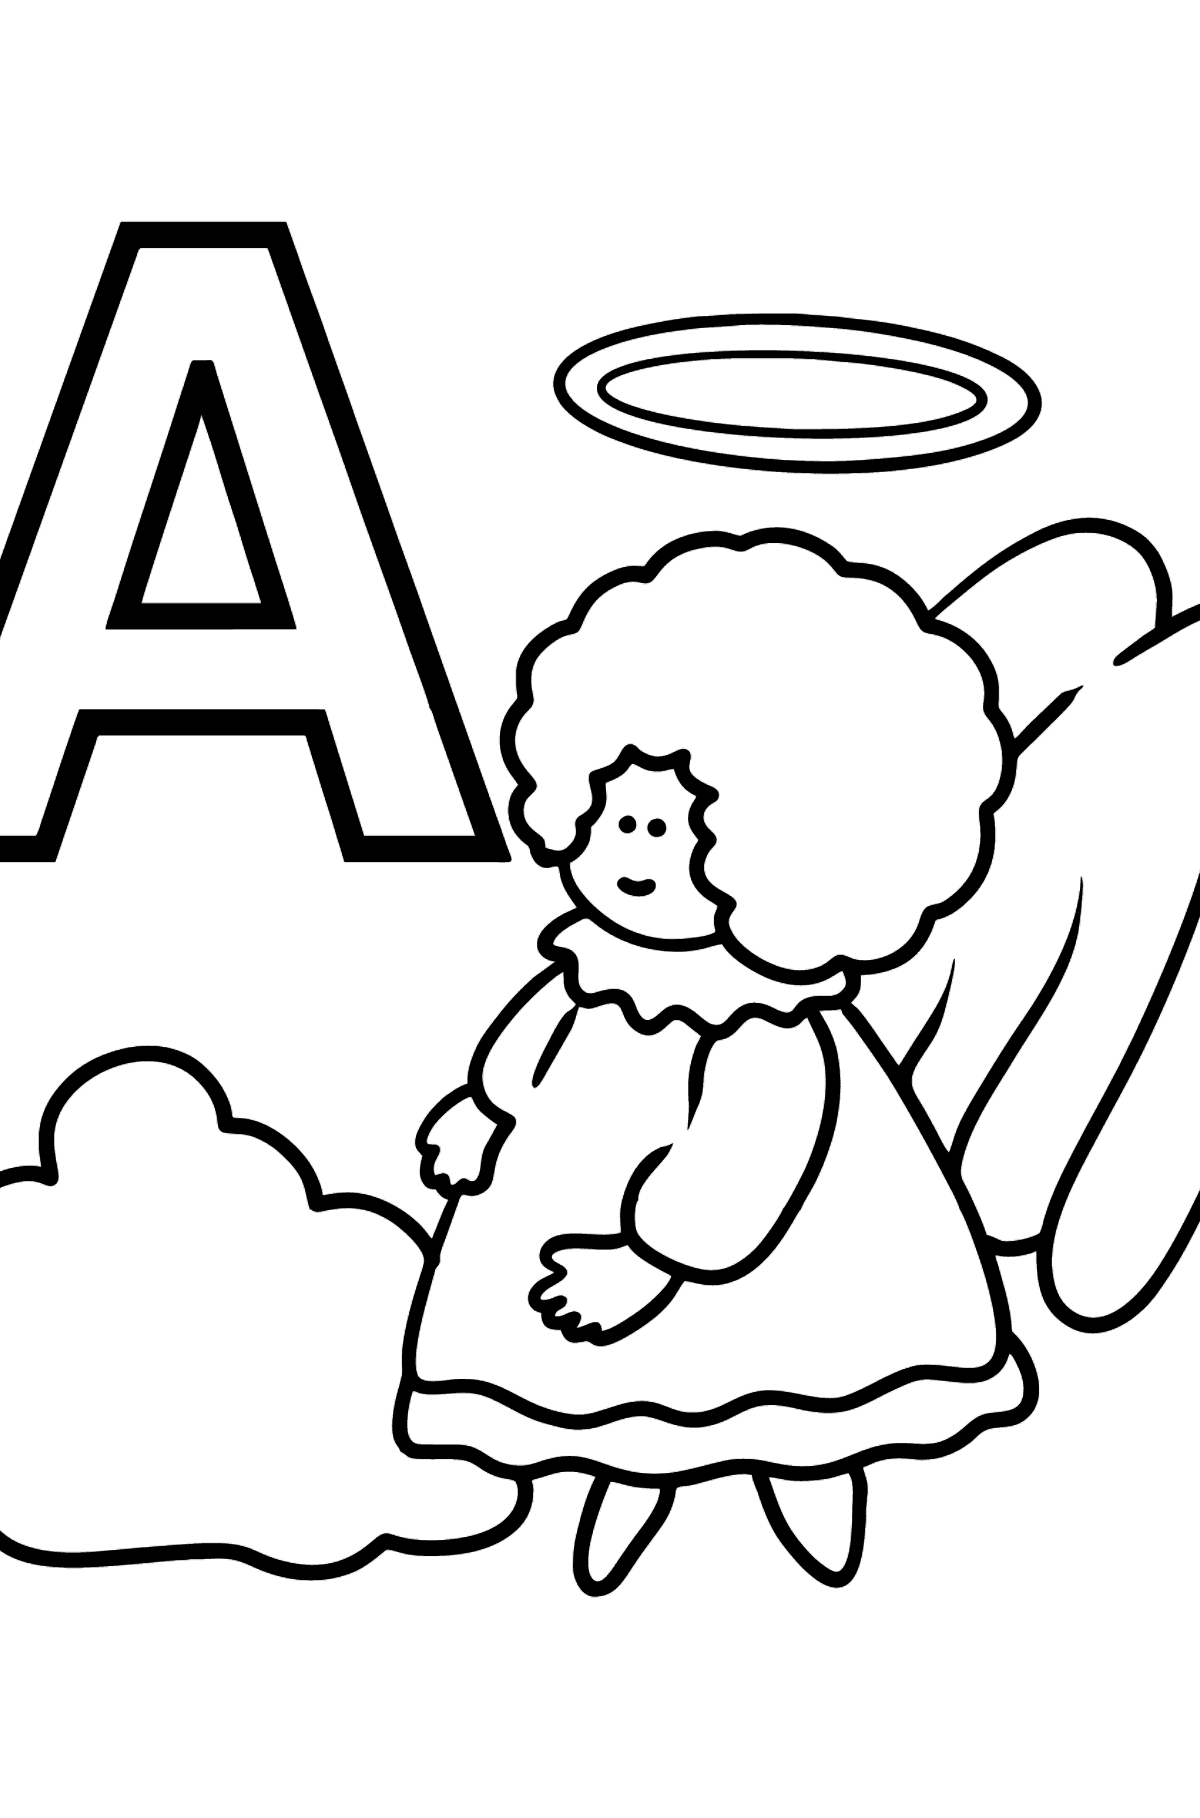 Spanish Letter A coloring pages - ÁNGEL - Coloring Pages for Kids